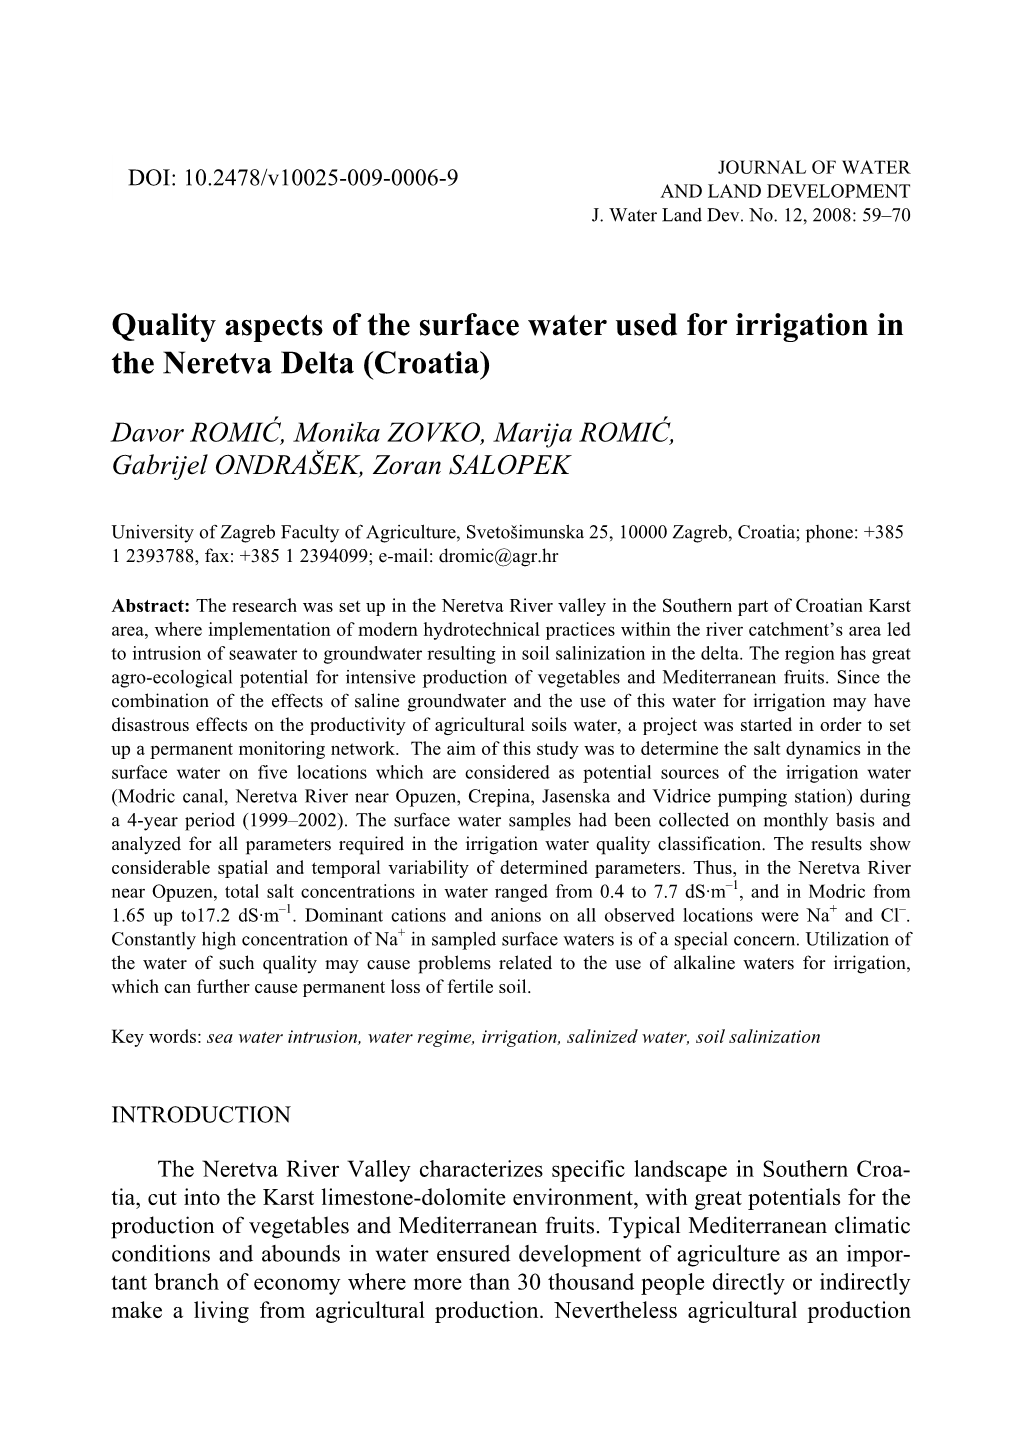 Quality Aspects of the Surface Water Used for Irrigation in the Neretva Delta (Croatia)